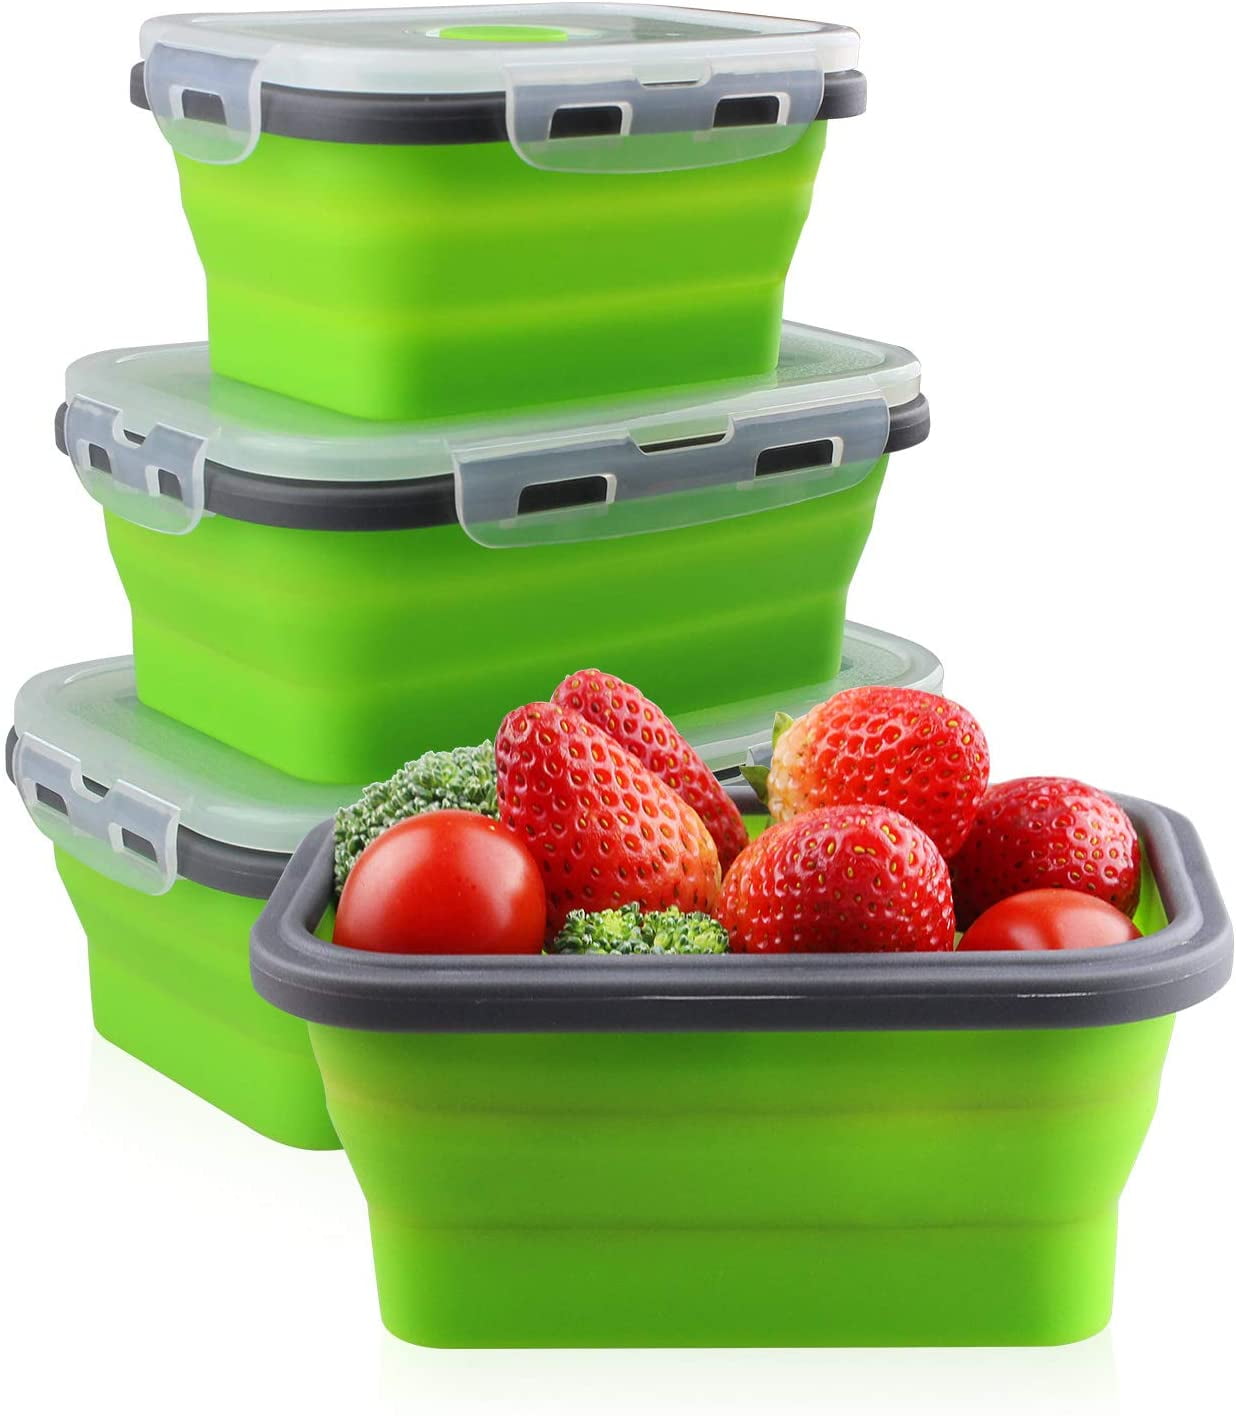 Silicone Folding Collapsible Lunch Bento Box Stackable Food Storage Container 